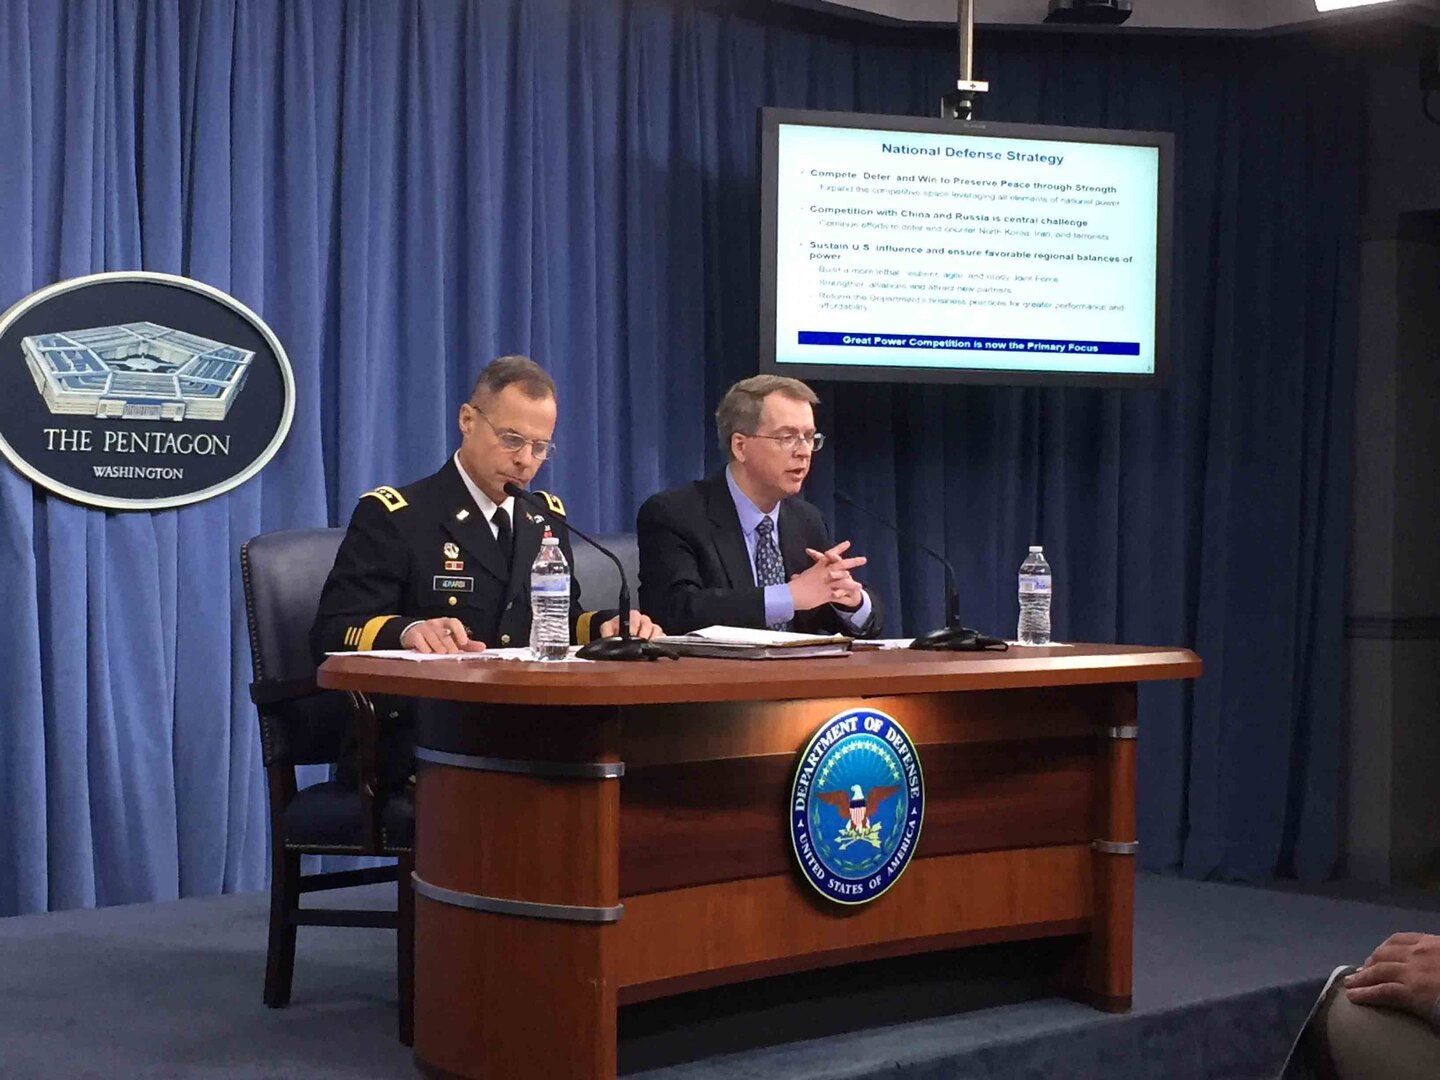 Joint Staff officer and Defense Department comptroller describe the president's fiscal year 2019 defense budget request to reporters at the Pentagon.